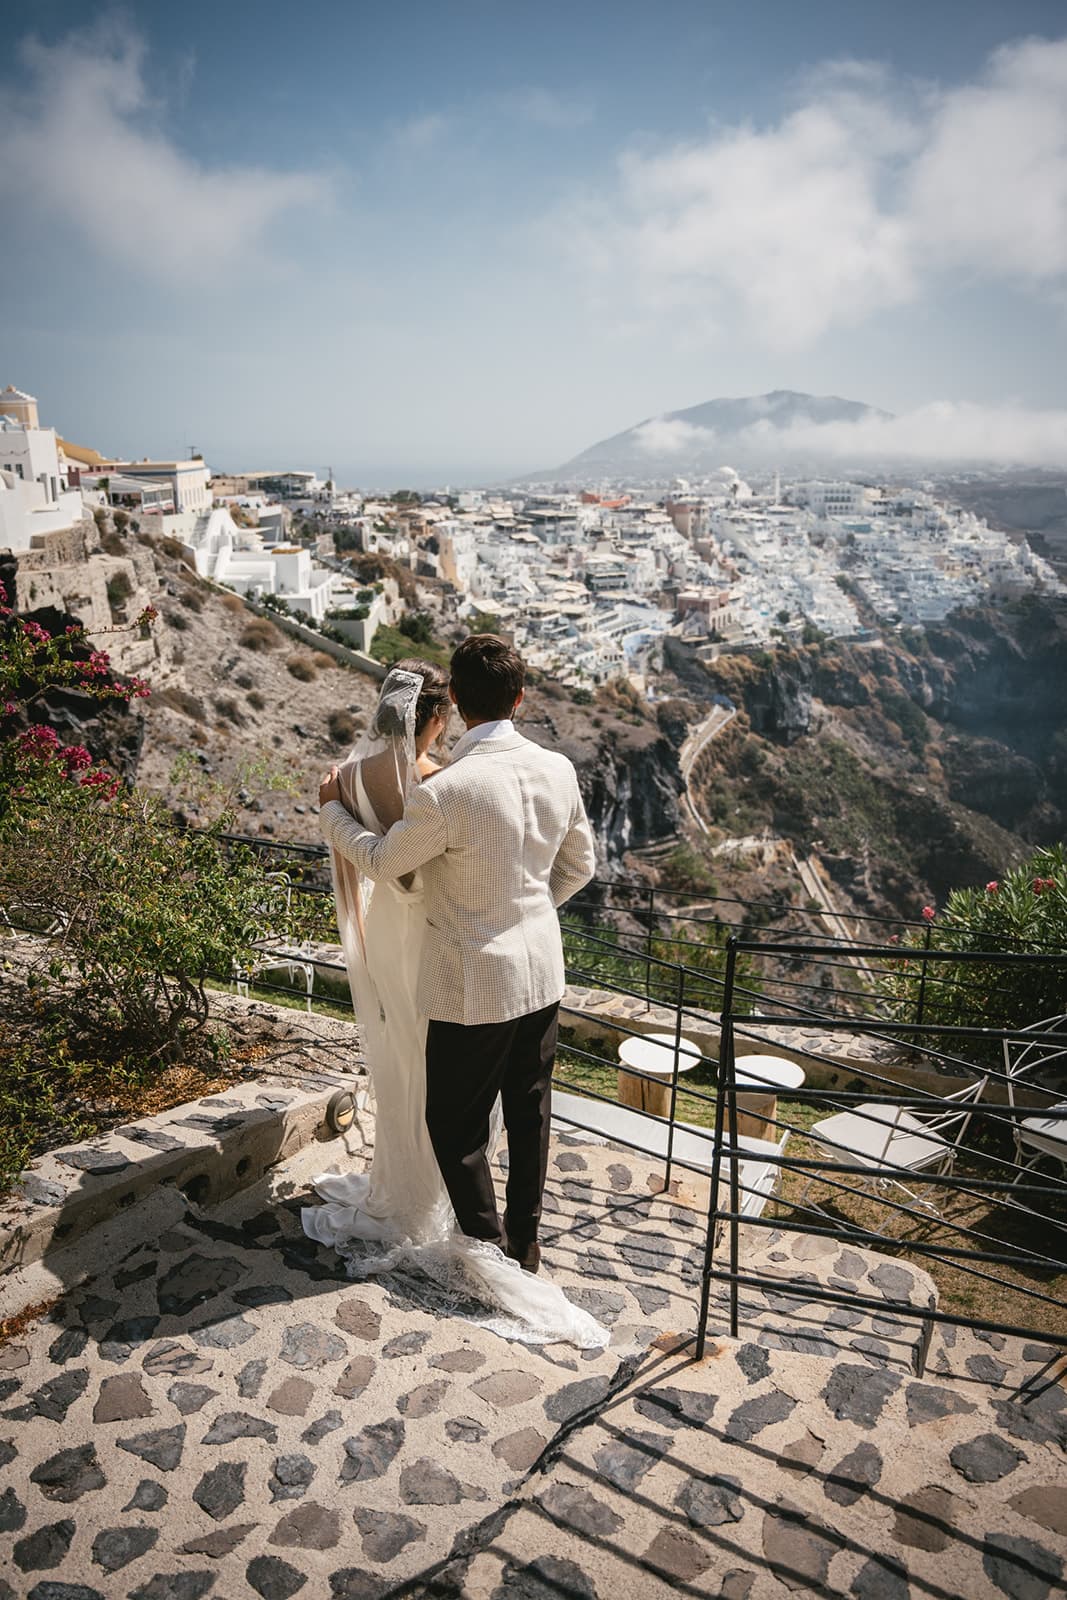 Pausing to marvel at Fira’s vistas, their elopement journey framed by infinite blue